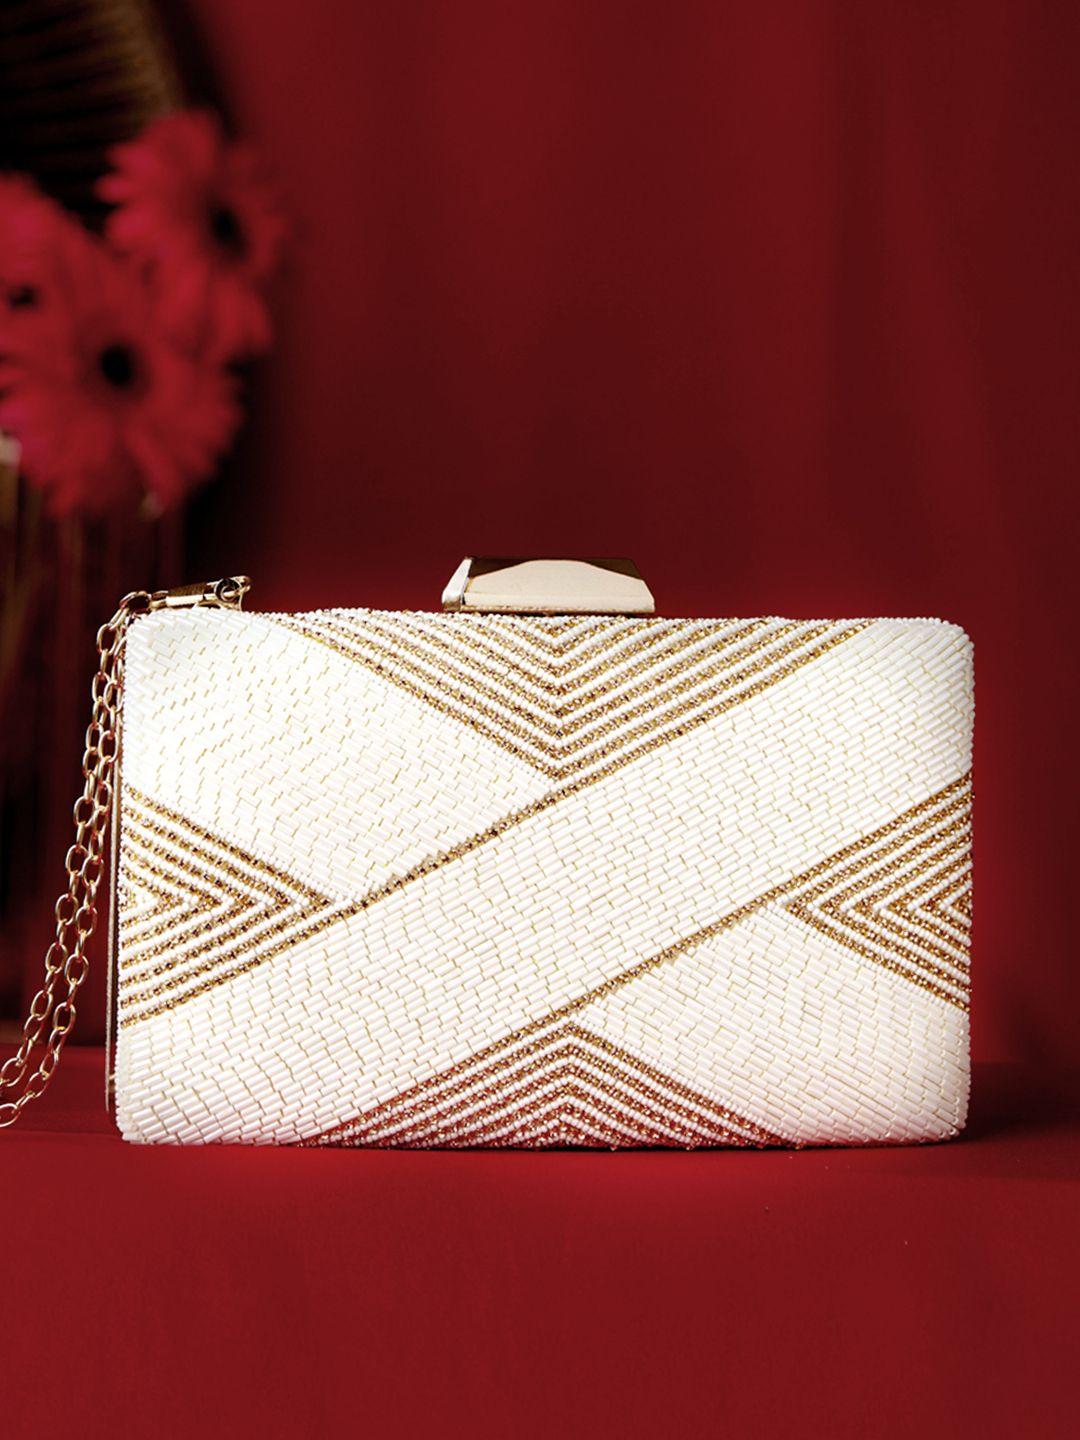 rubans white & gold-toned embellished embroidered box clutch